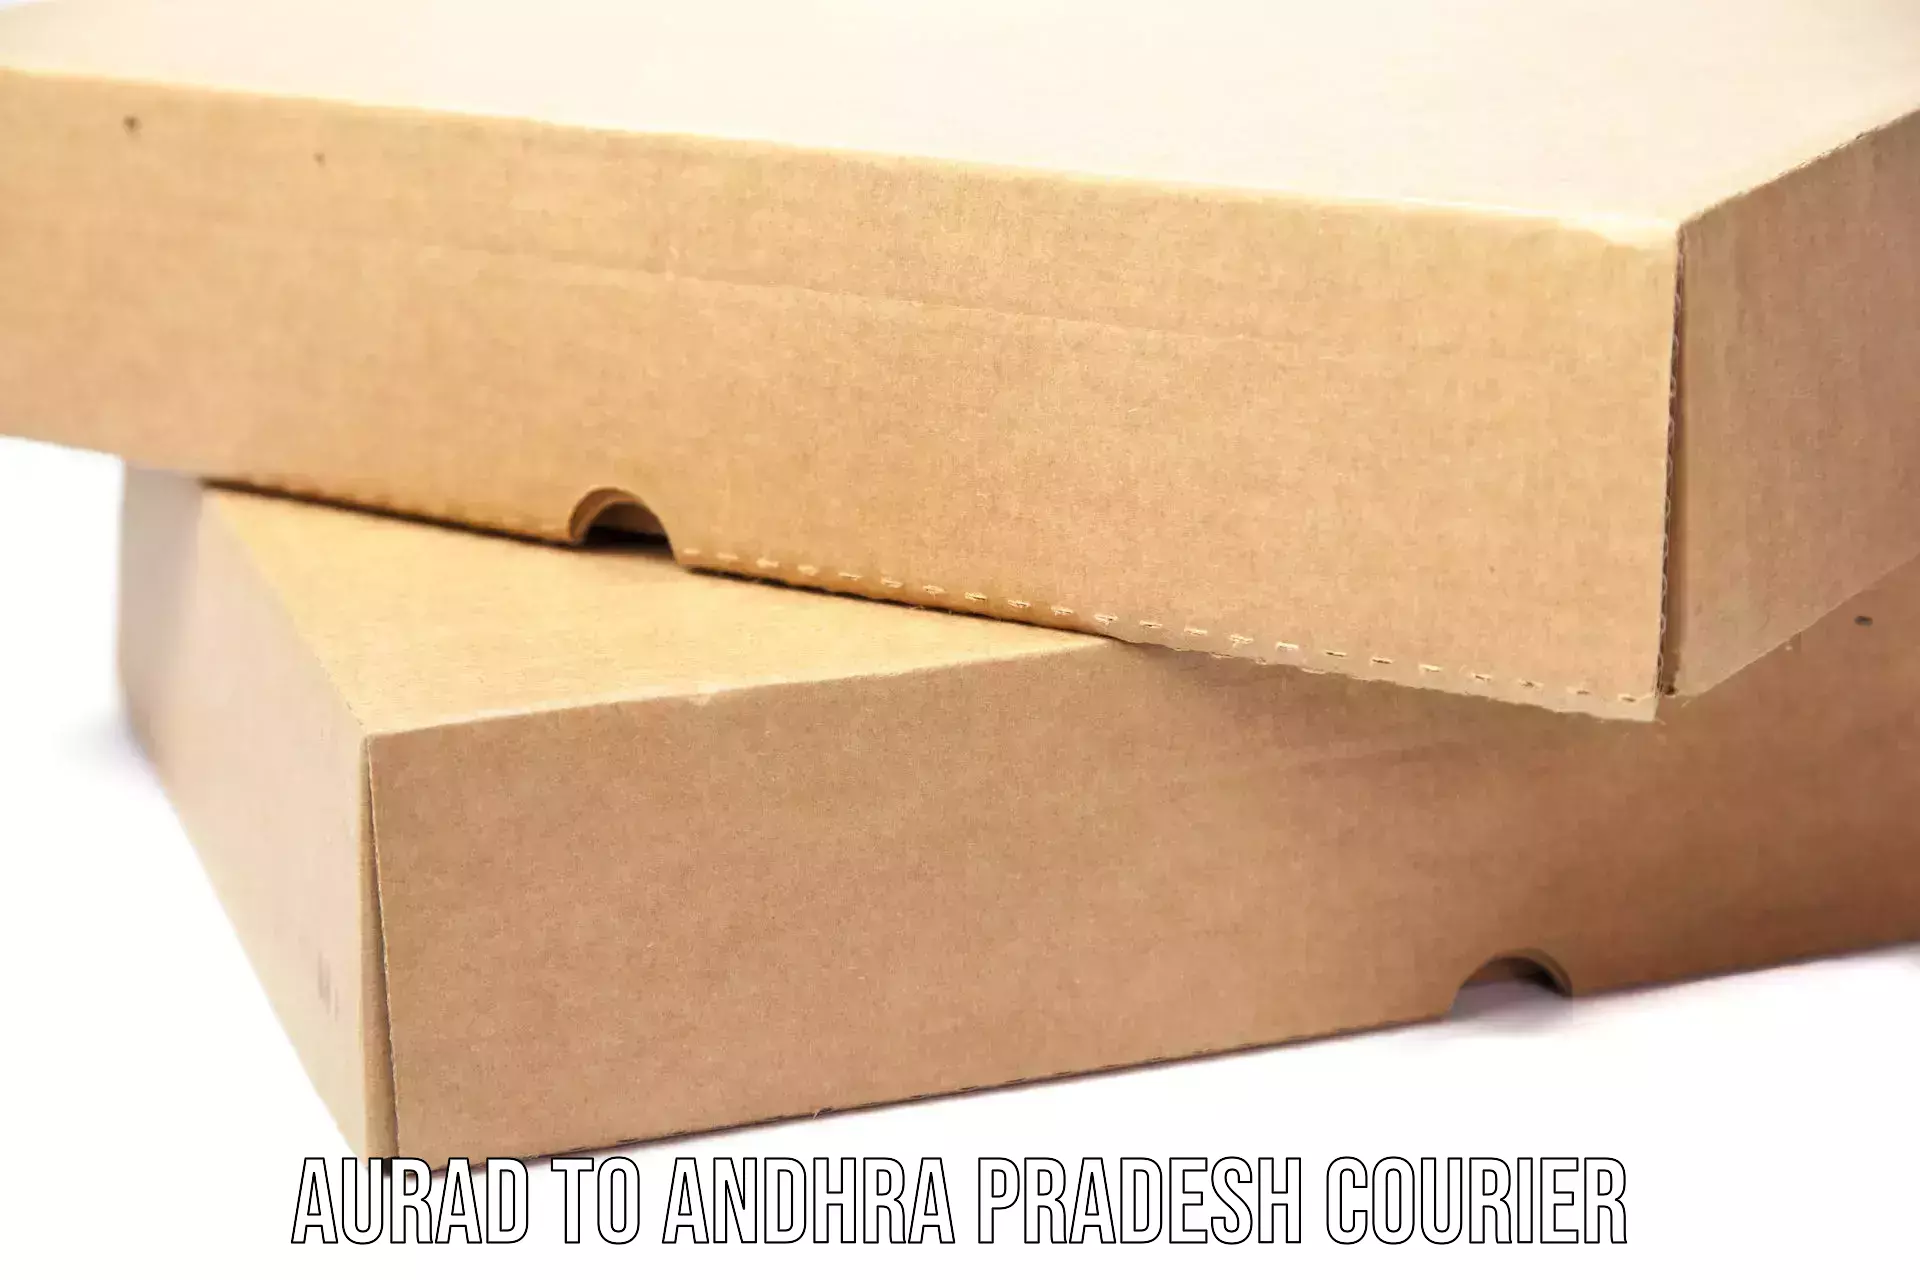 Special handling courier in Aurad to Andhra Pradesh